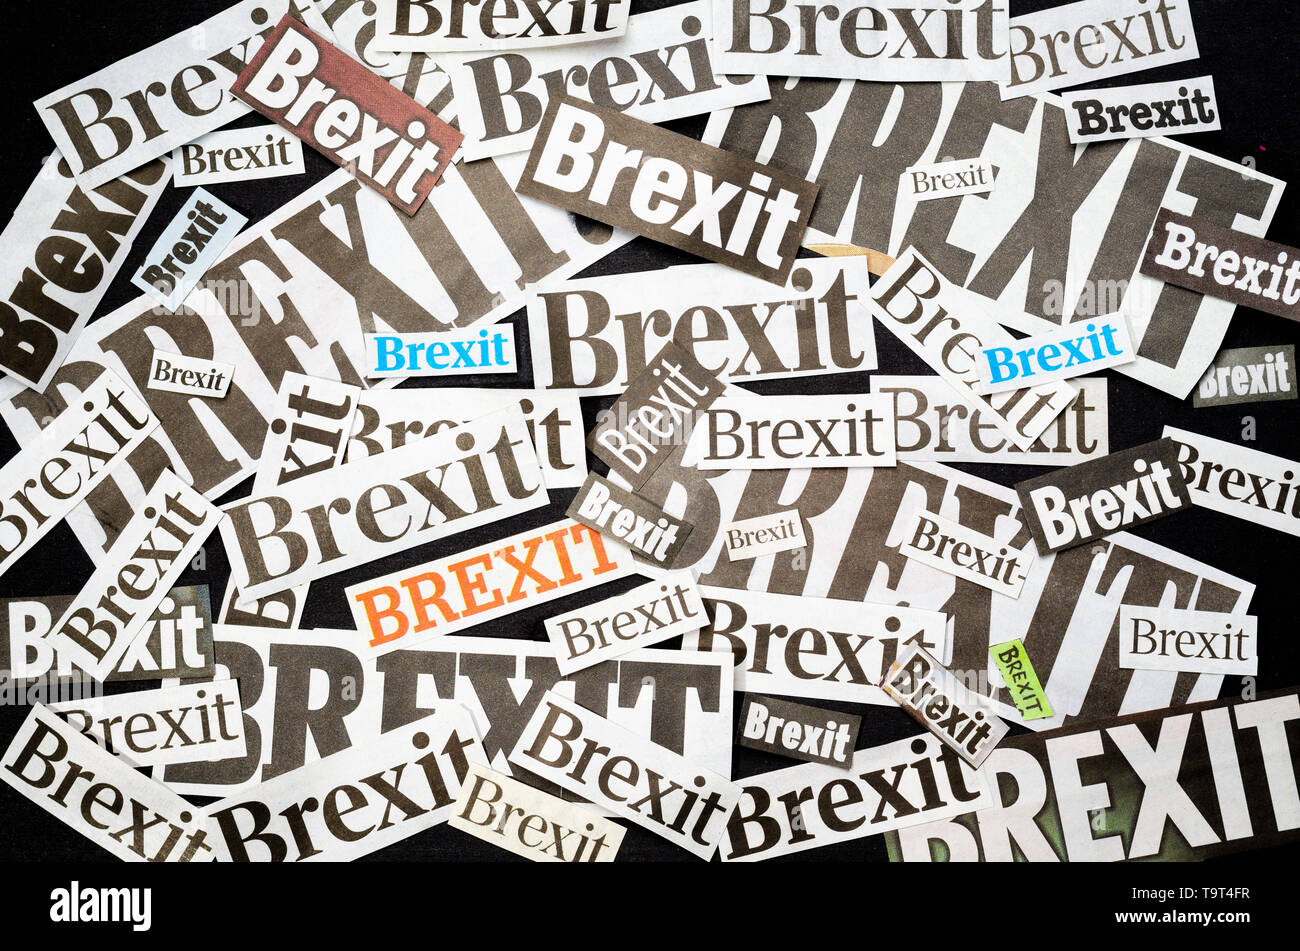 The word Brexit in newspaper style Stock Photo